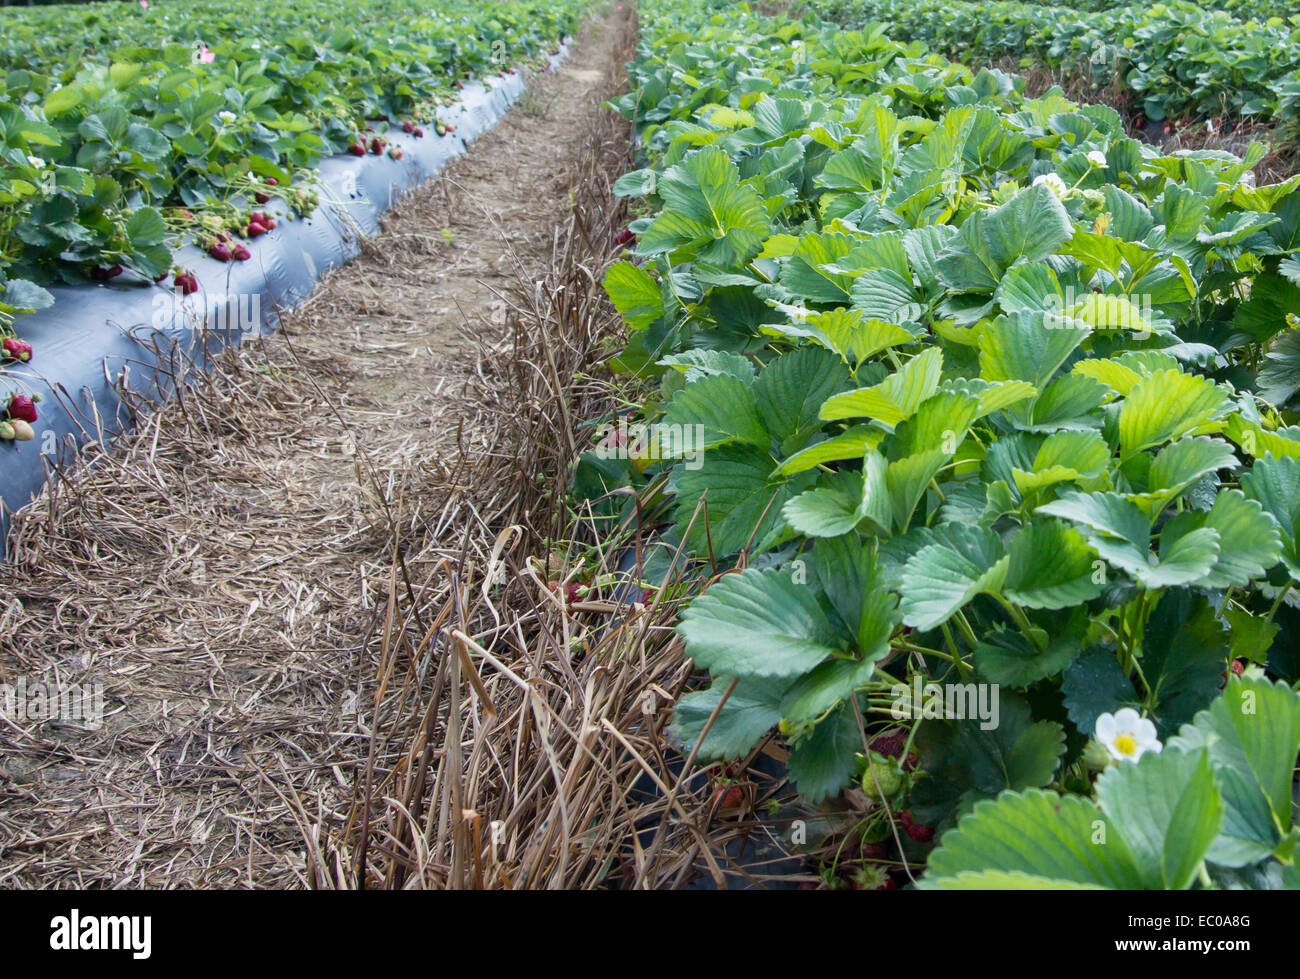 Strawberries ripen on the vines in rows on a fruit farm Stock Photo